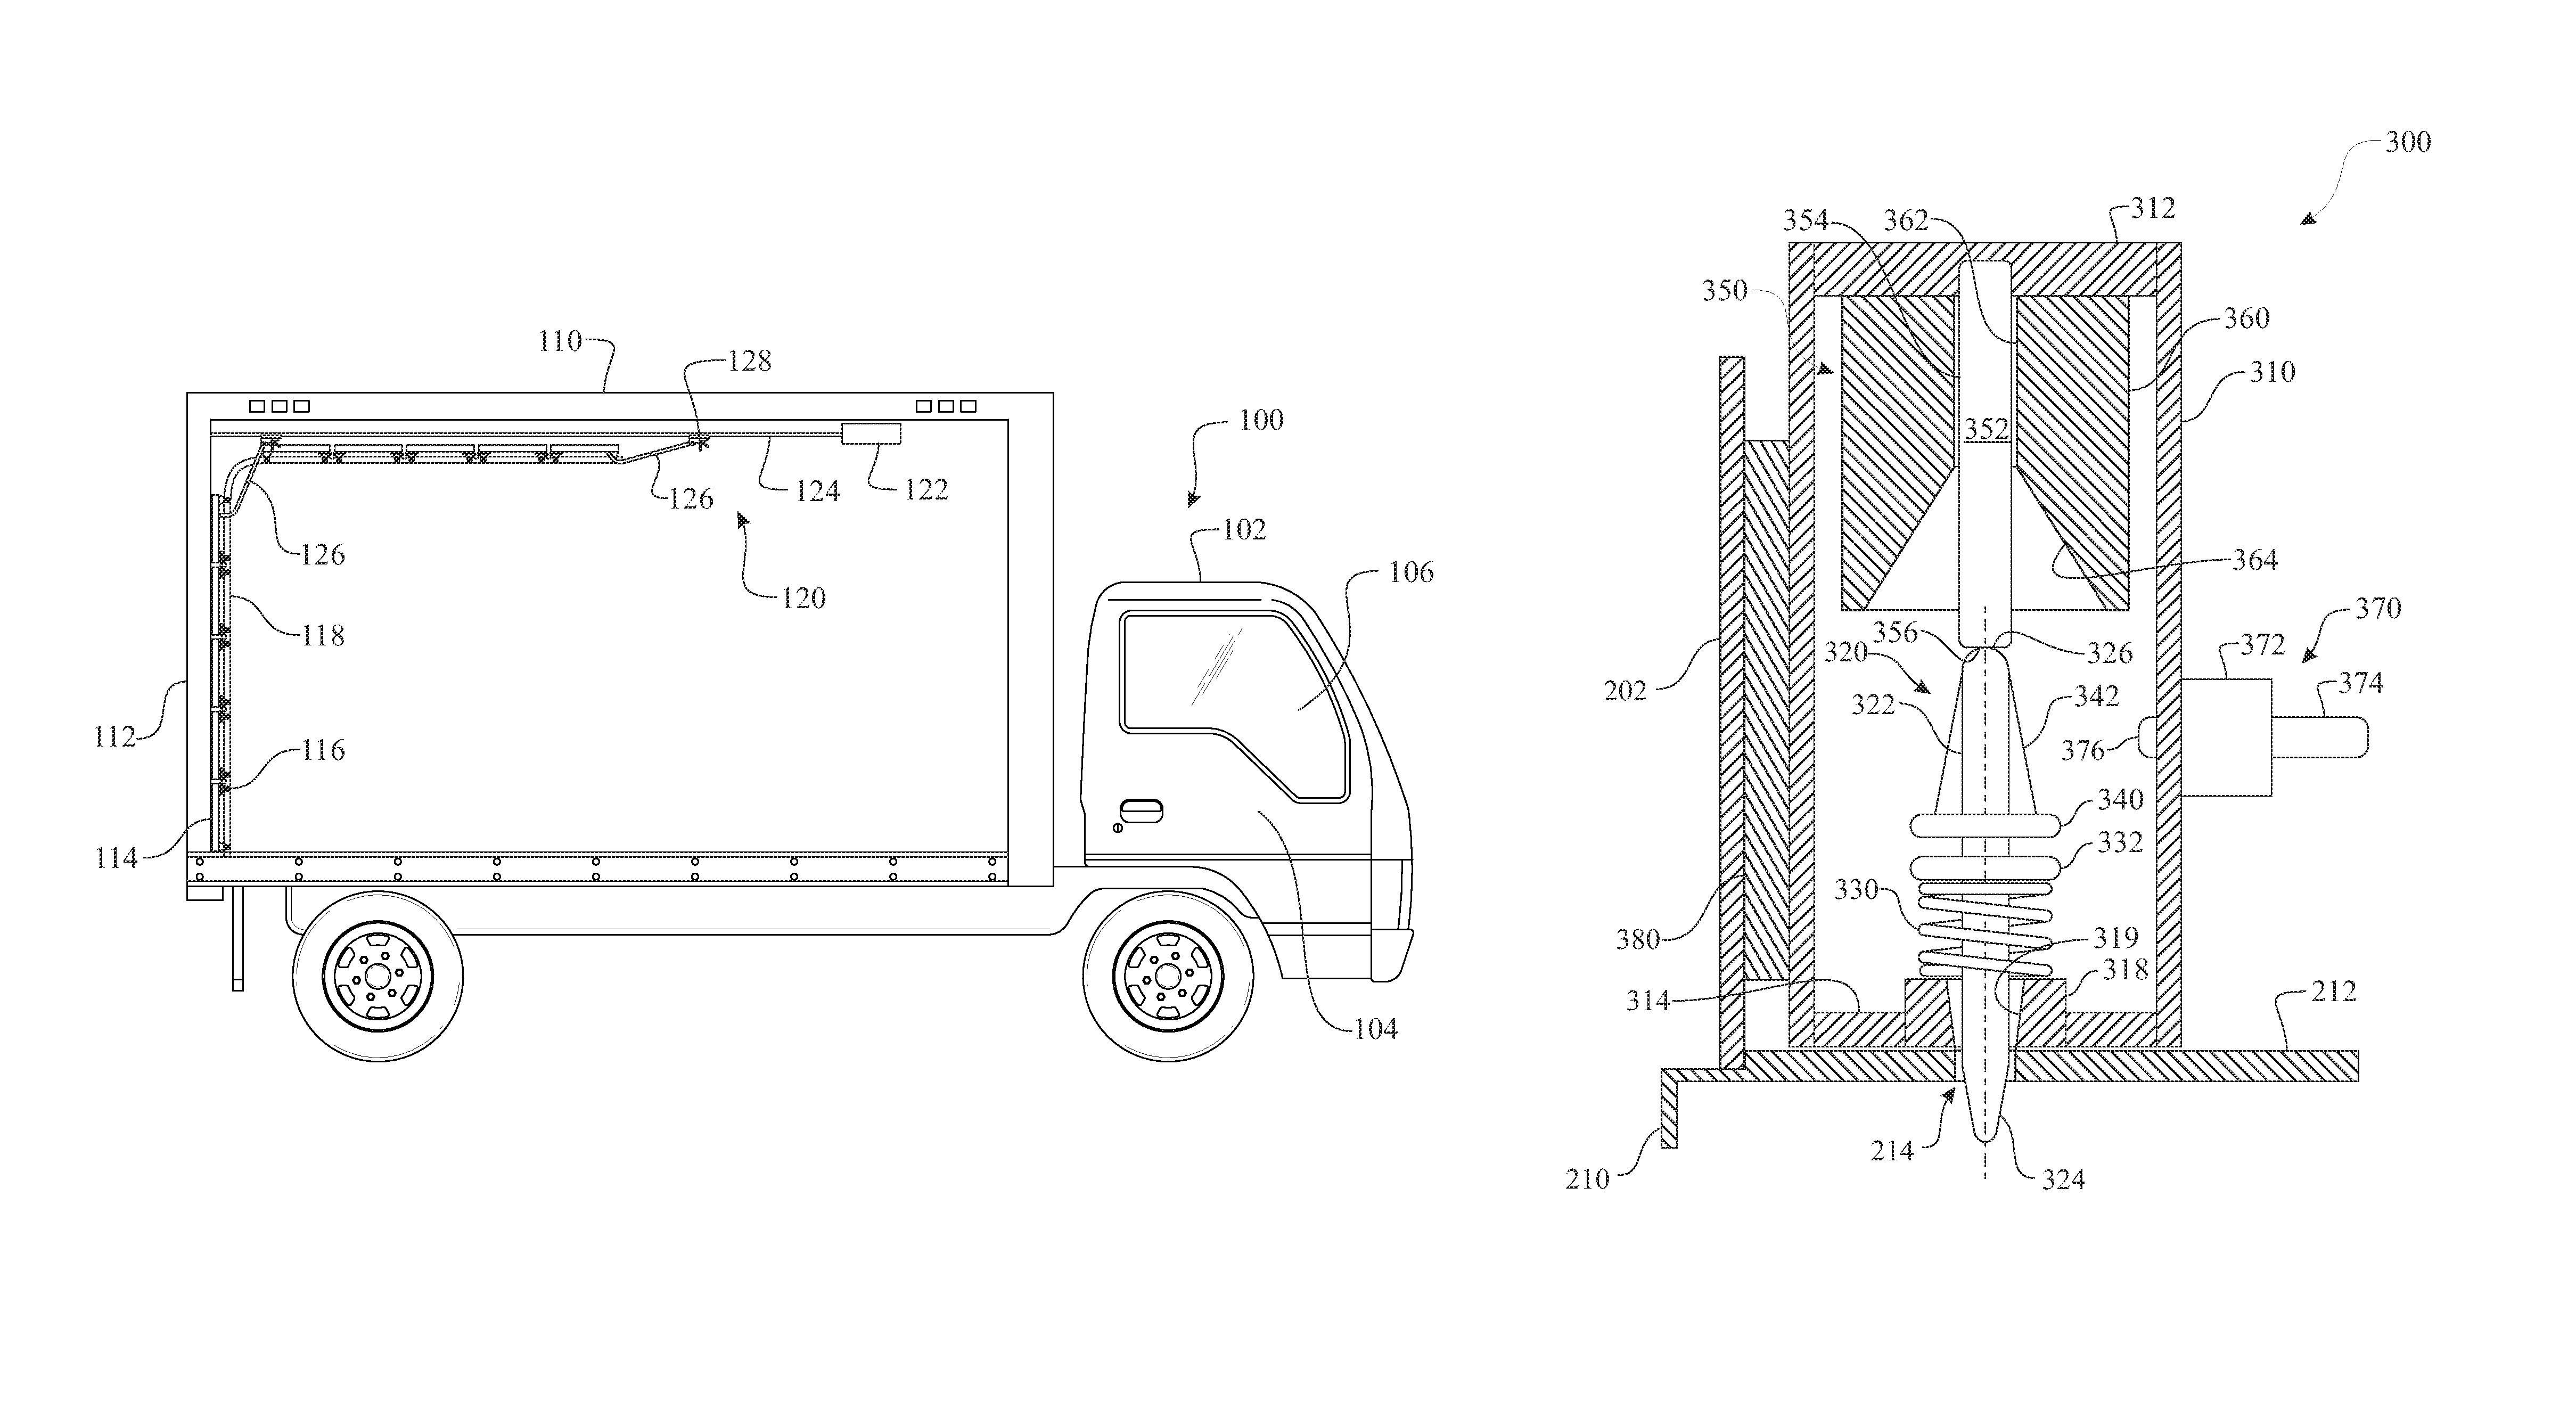 Cargo vehicle security system and method of use